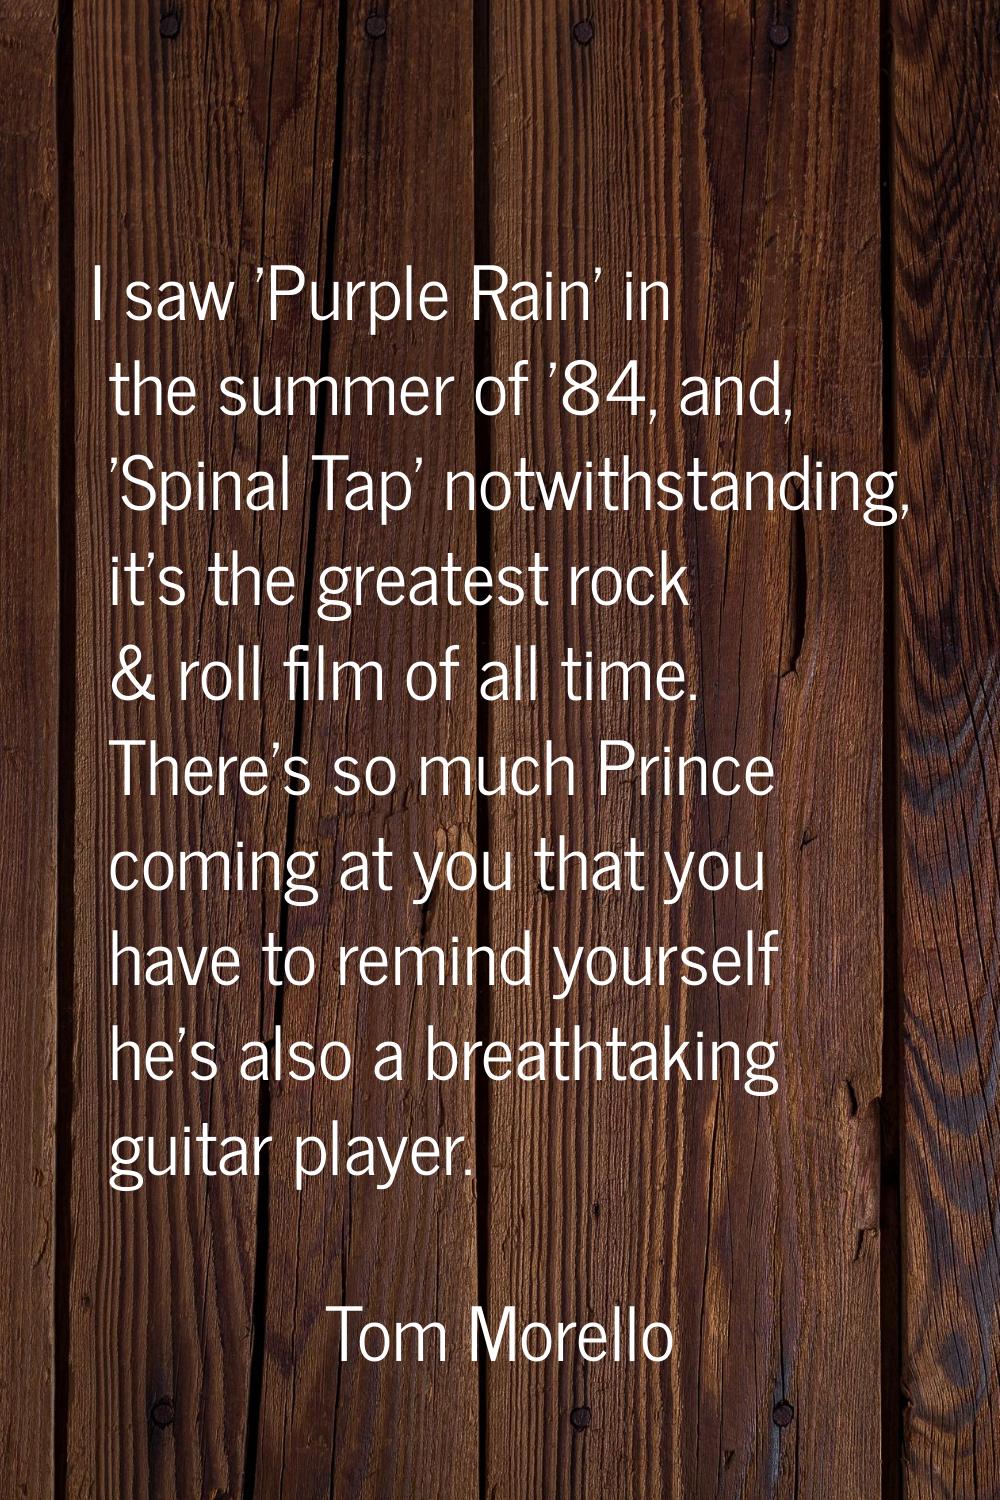 I saw 'Purple Rain' in the summer of '84, and, 'Spinal Tap' notwithstanding, it's the greatest rock